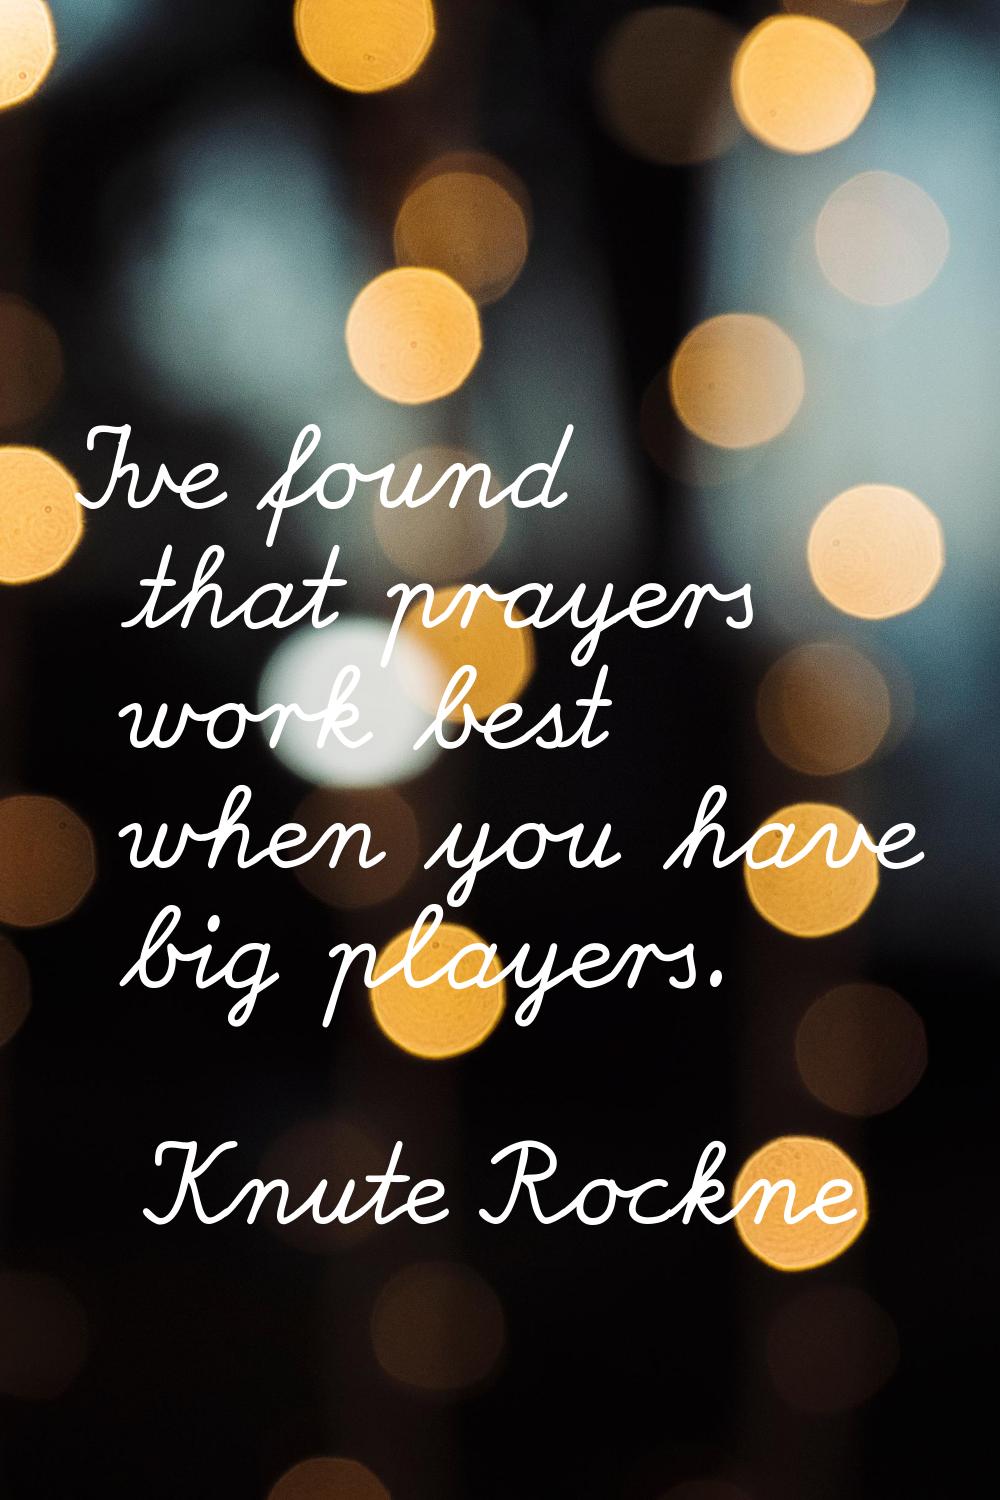 I've found that prayers work best when you have big players.